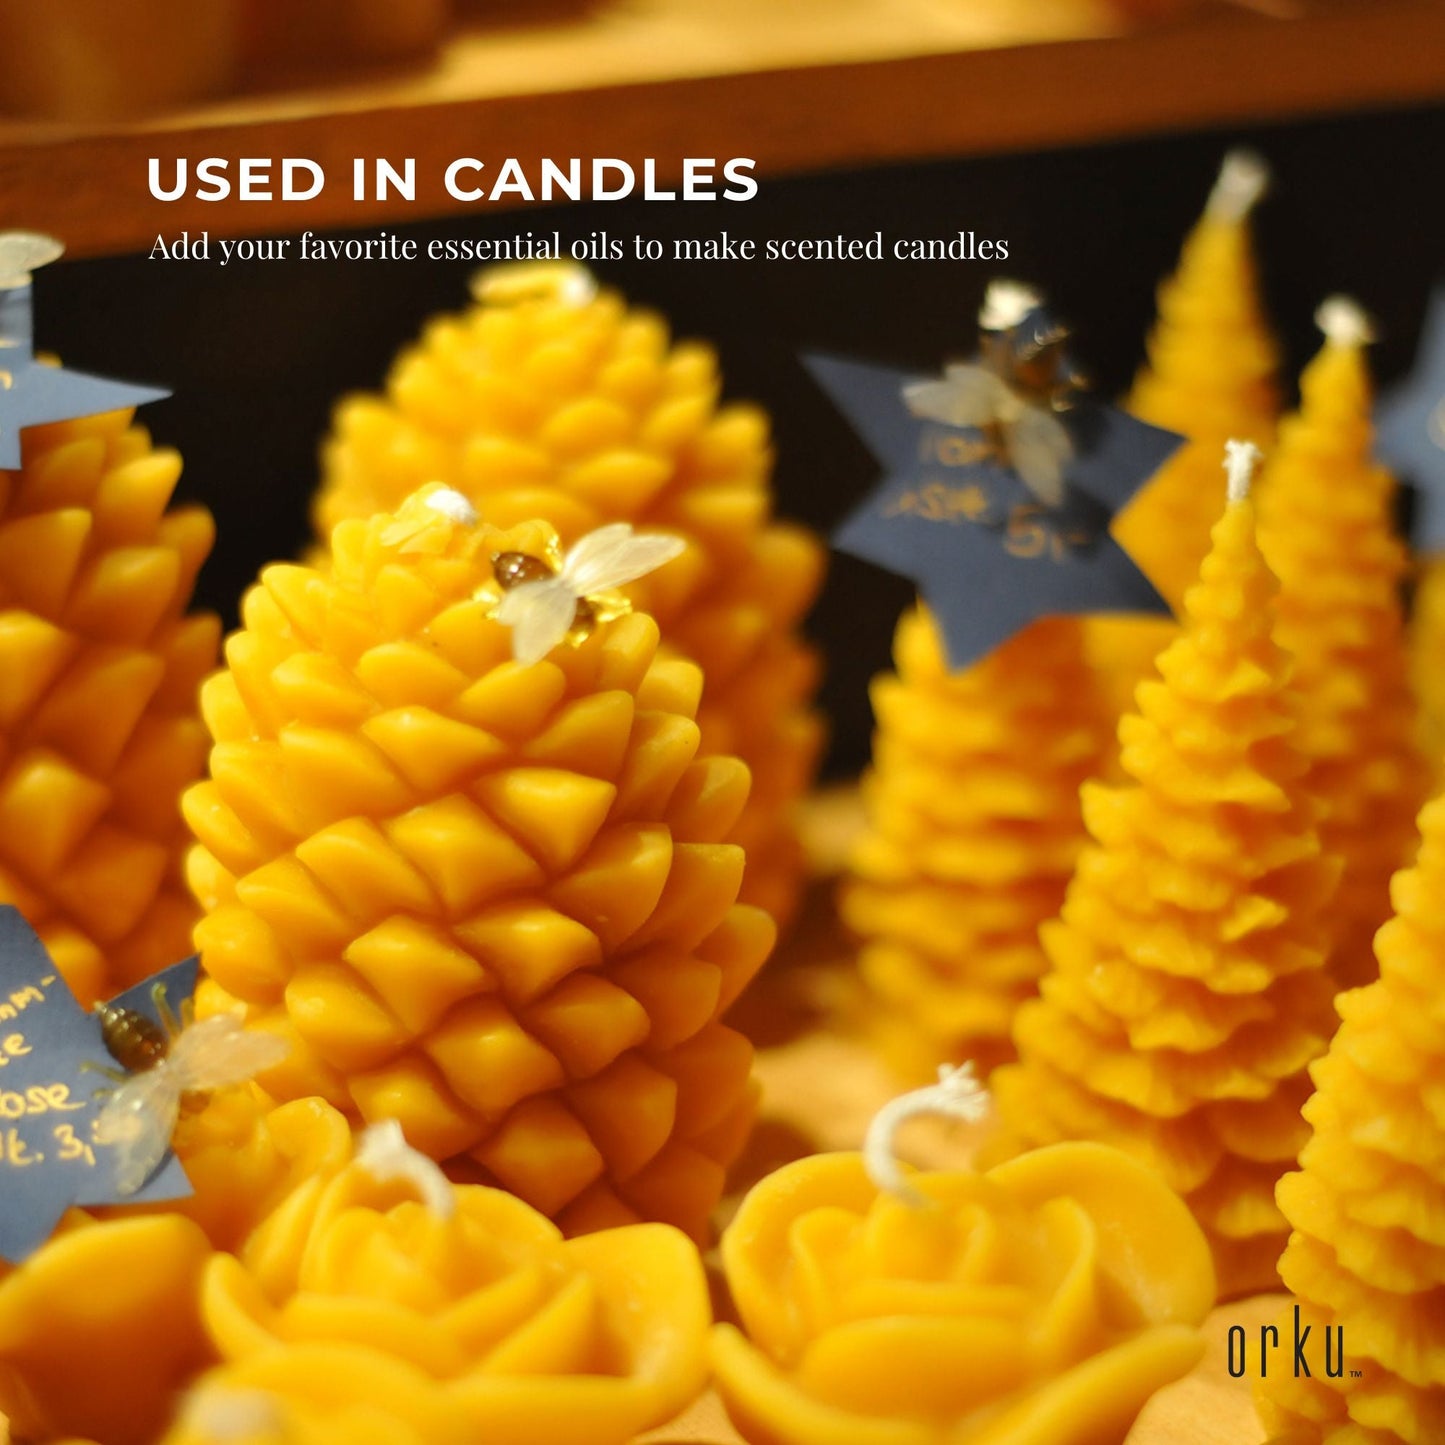 2kg Organic Beeswax Pellets Yellow Pharmaceutical Cosmetic Candle Bees Wax